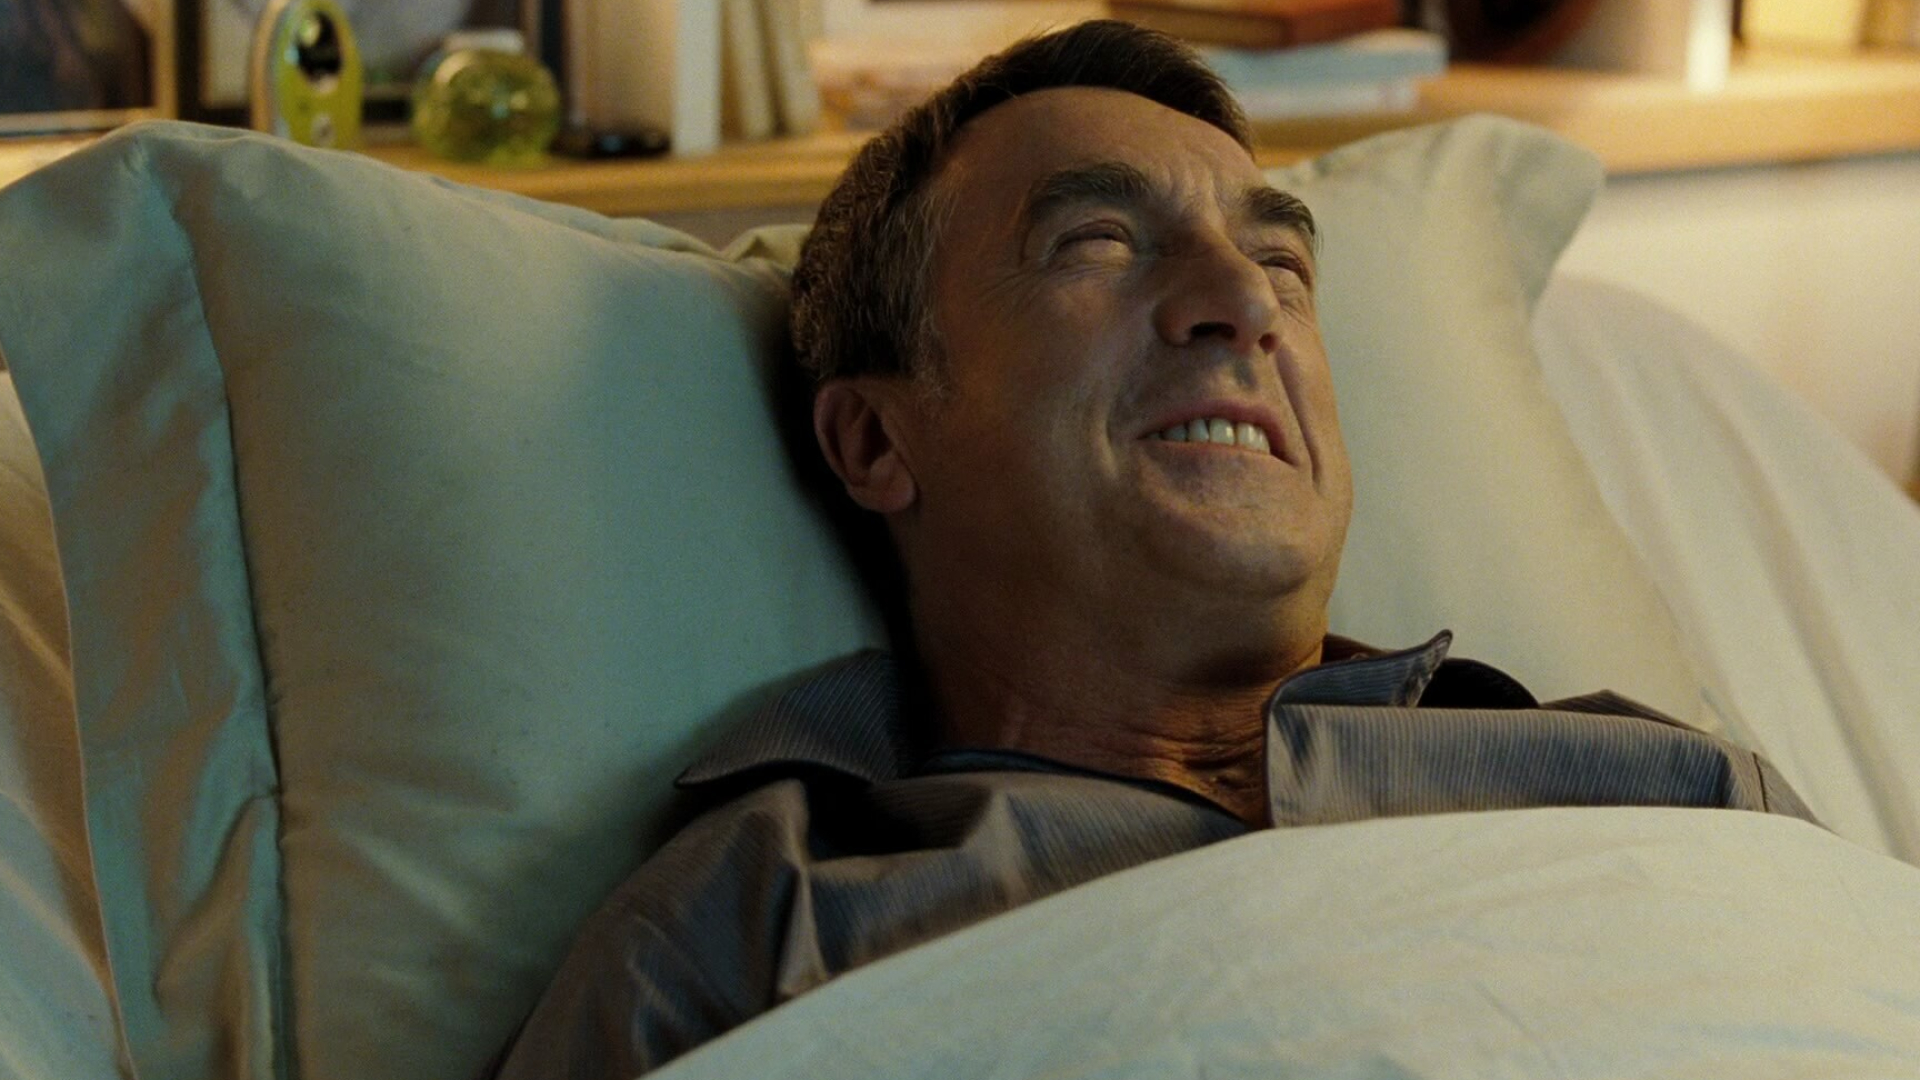 Intouchables: The film had become the most-watched film in France in 2011, Francois Cluzet. 1920x1080 Full HD Background.